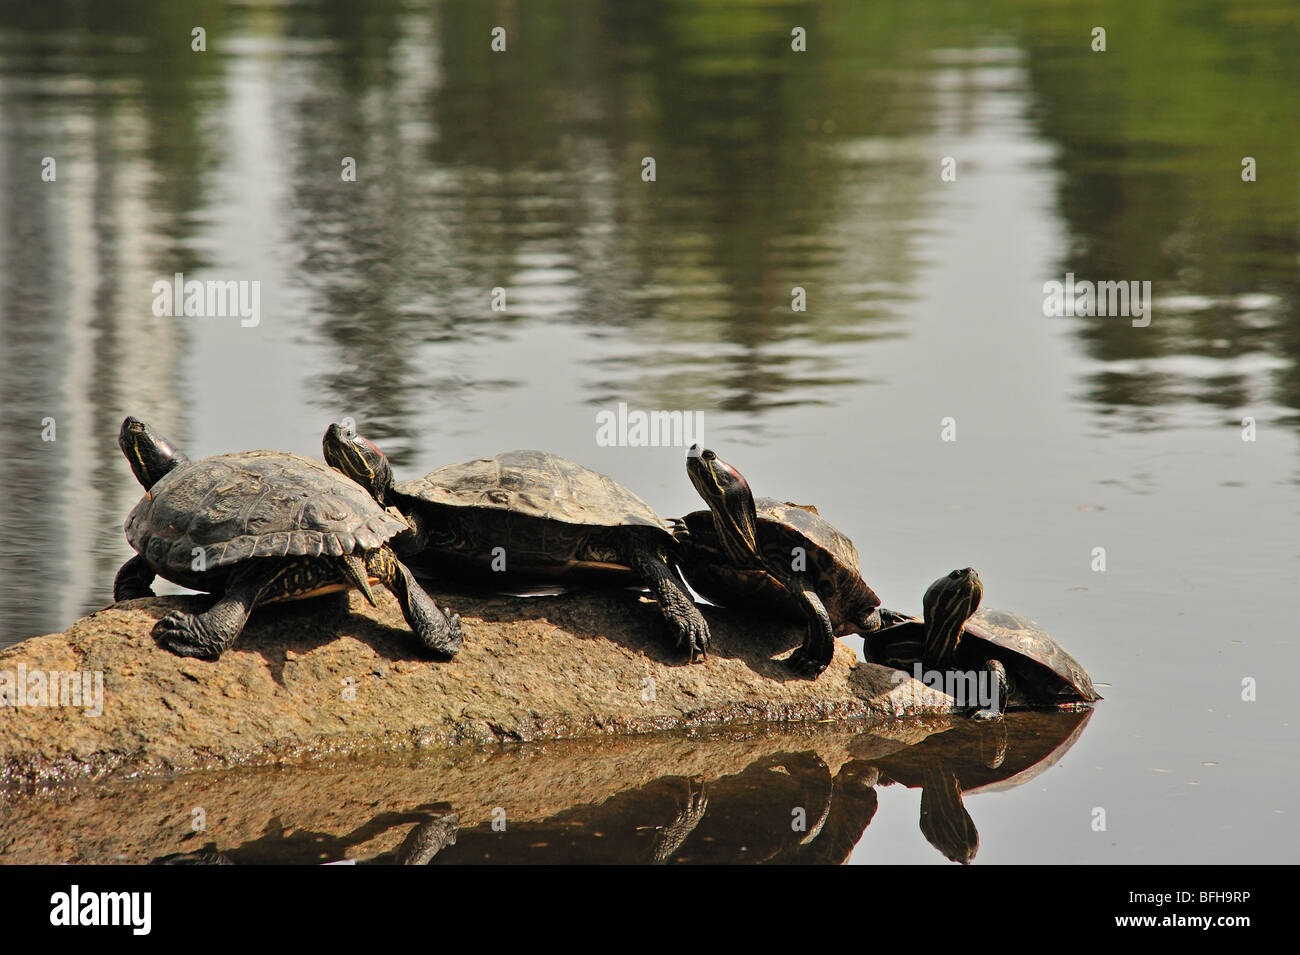 turtles sunning on rock in Lost Lagoon, Stanley Park, Vancouver, British Columbia, Canada Stock Photo